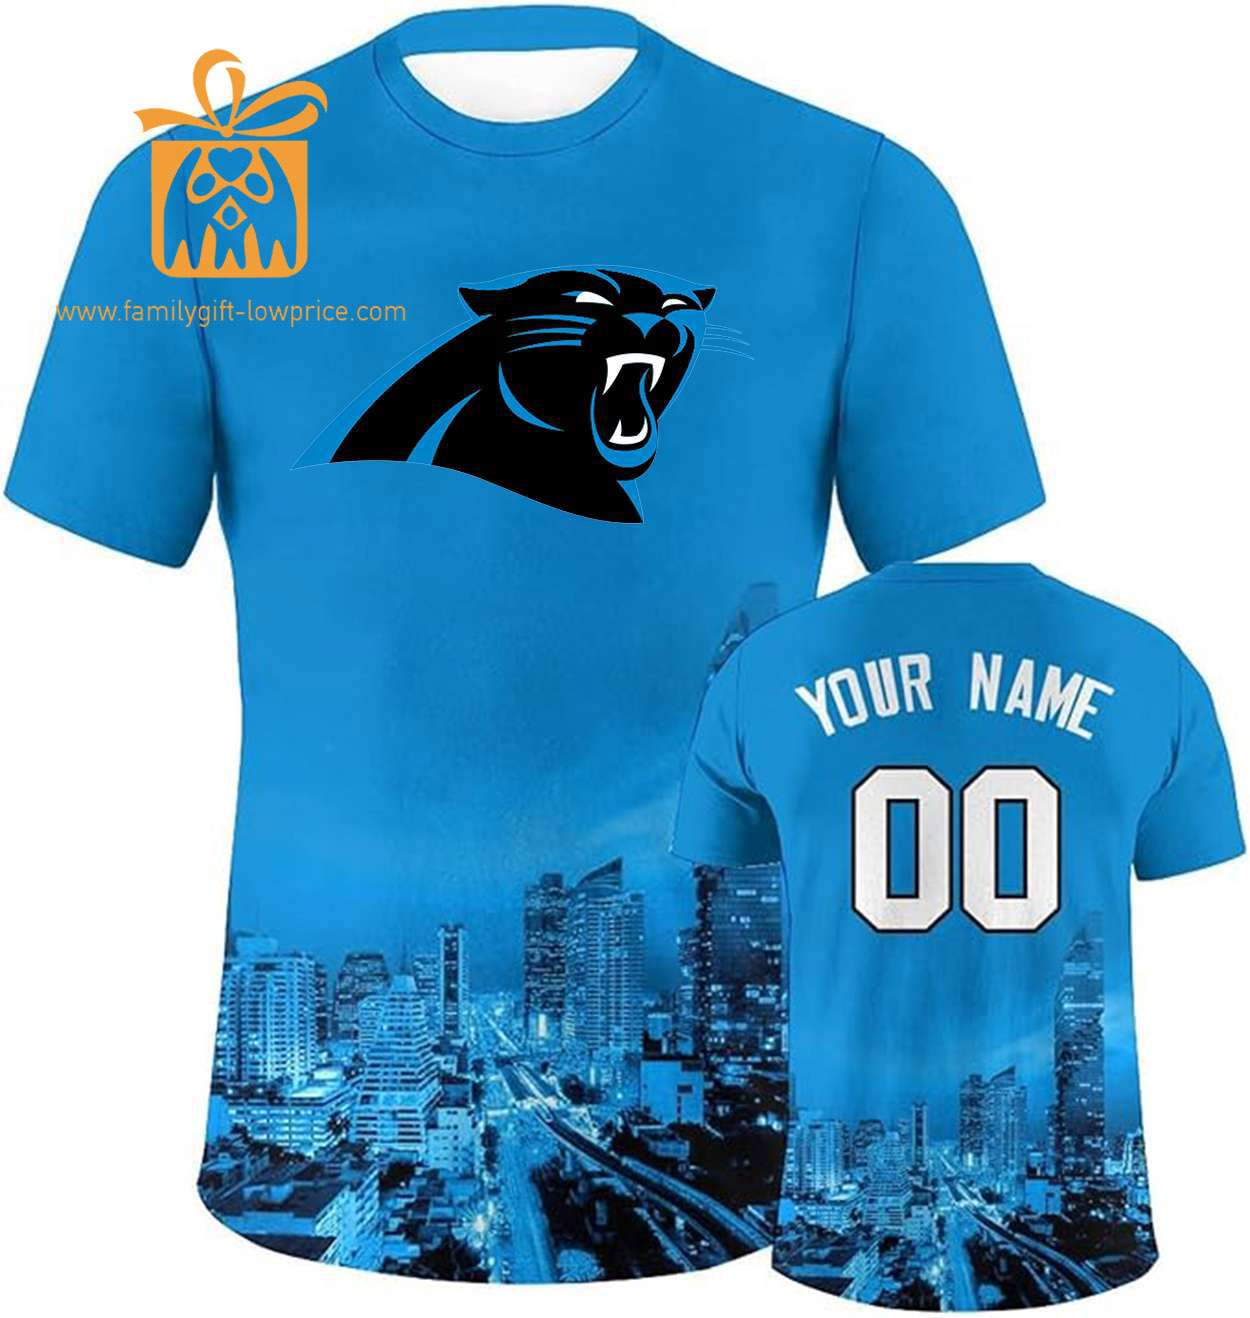 Carolina Panthers Custom Football Shirts – Personalized Name & Number, Ideal for Fans